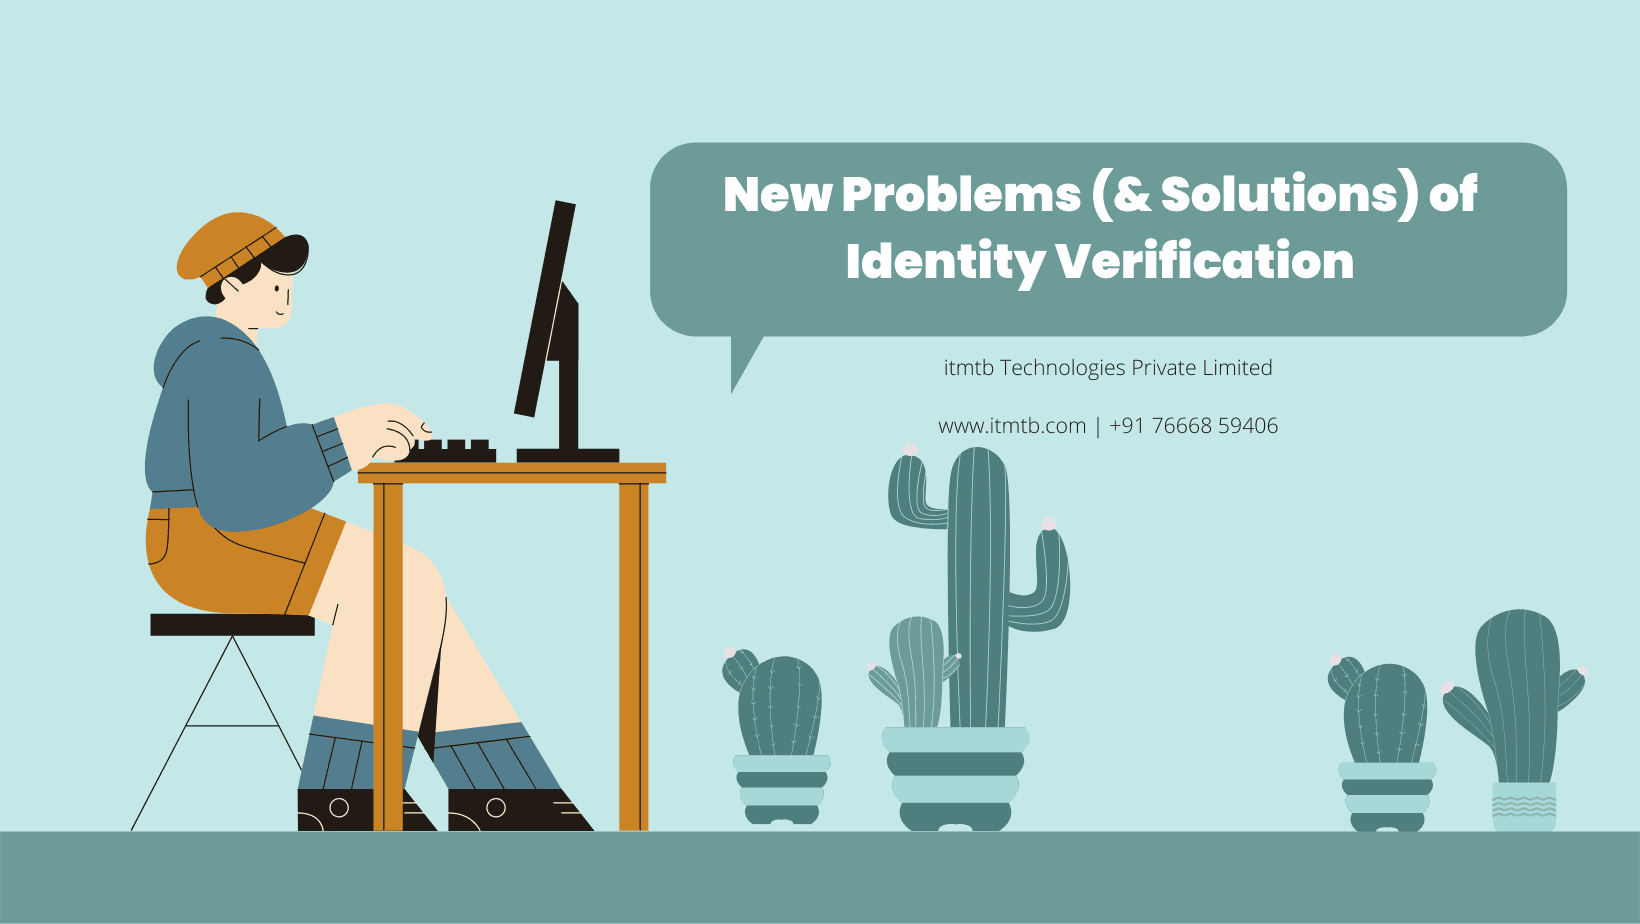 New Problems (& Solutions) of Identity Verification.